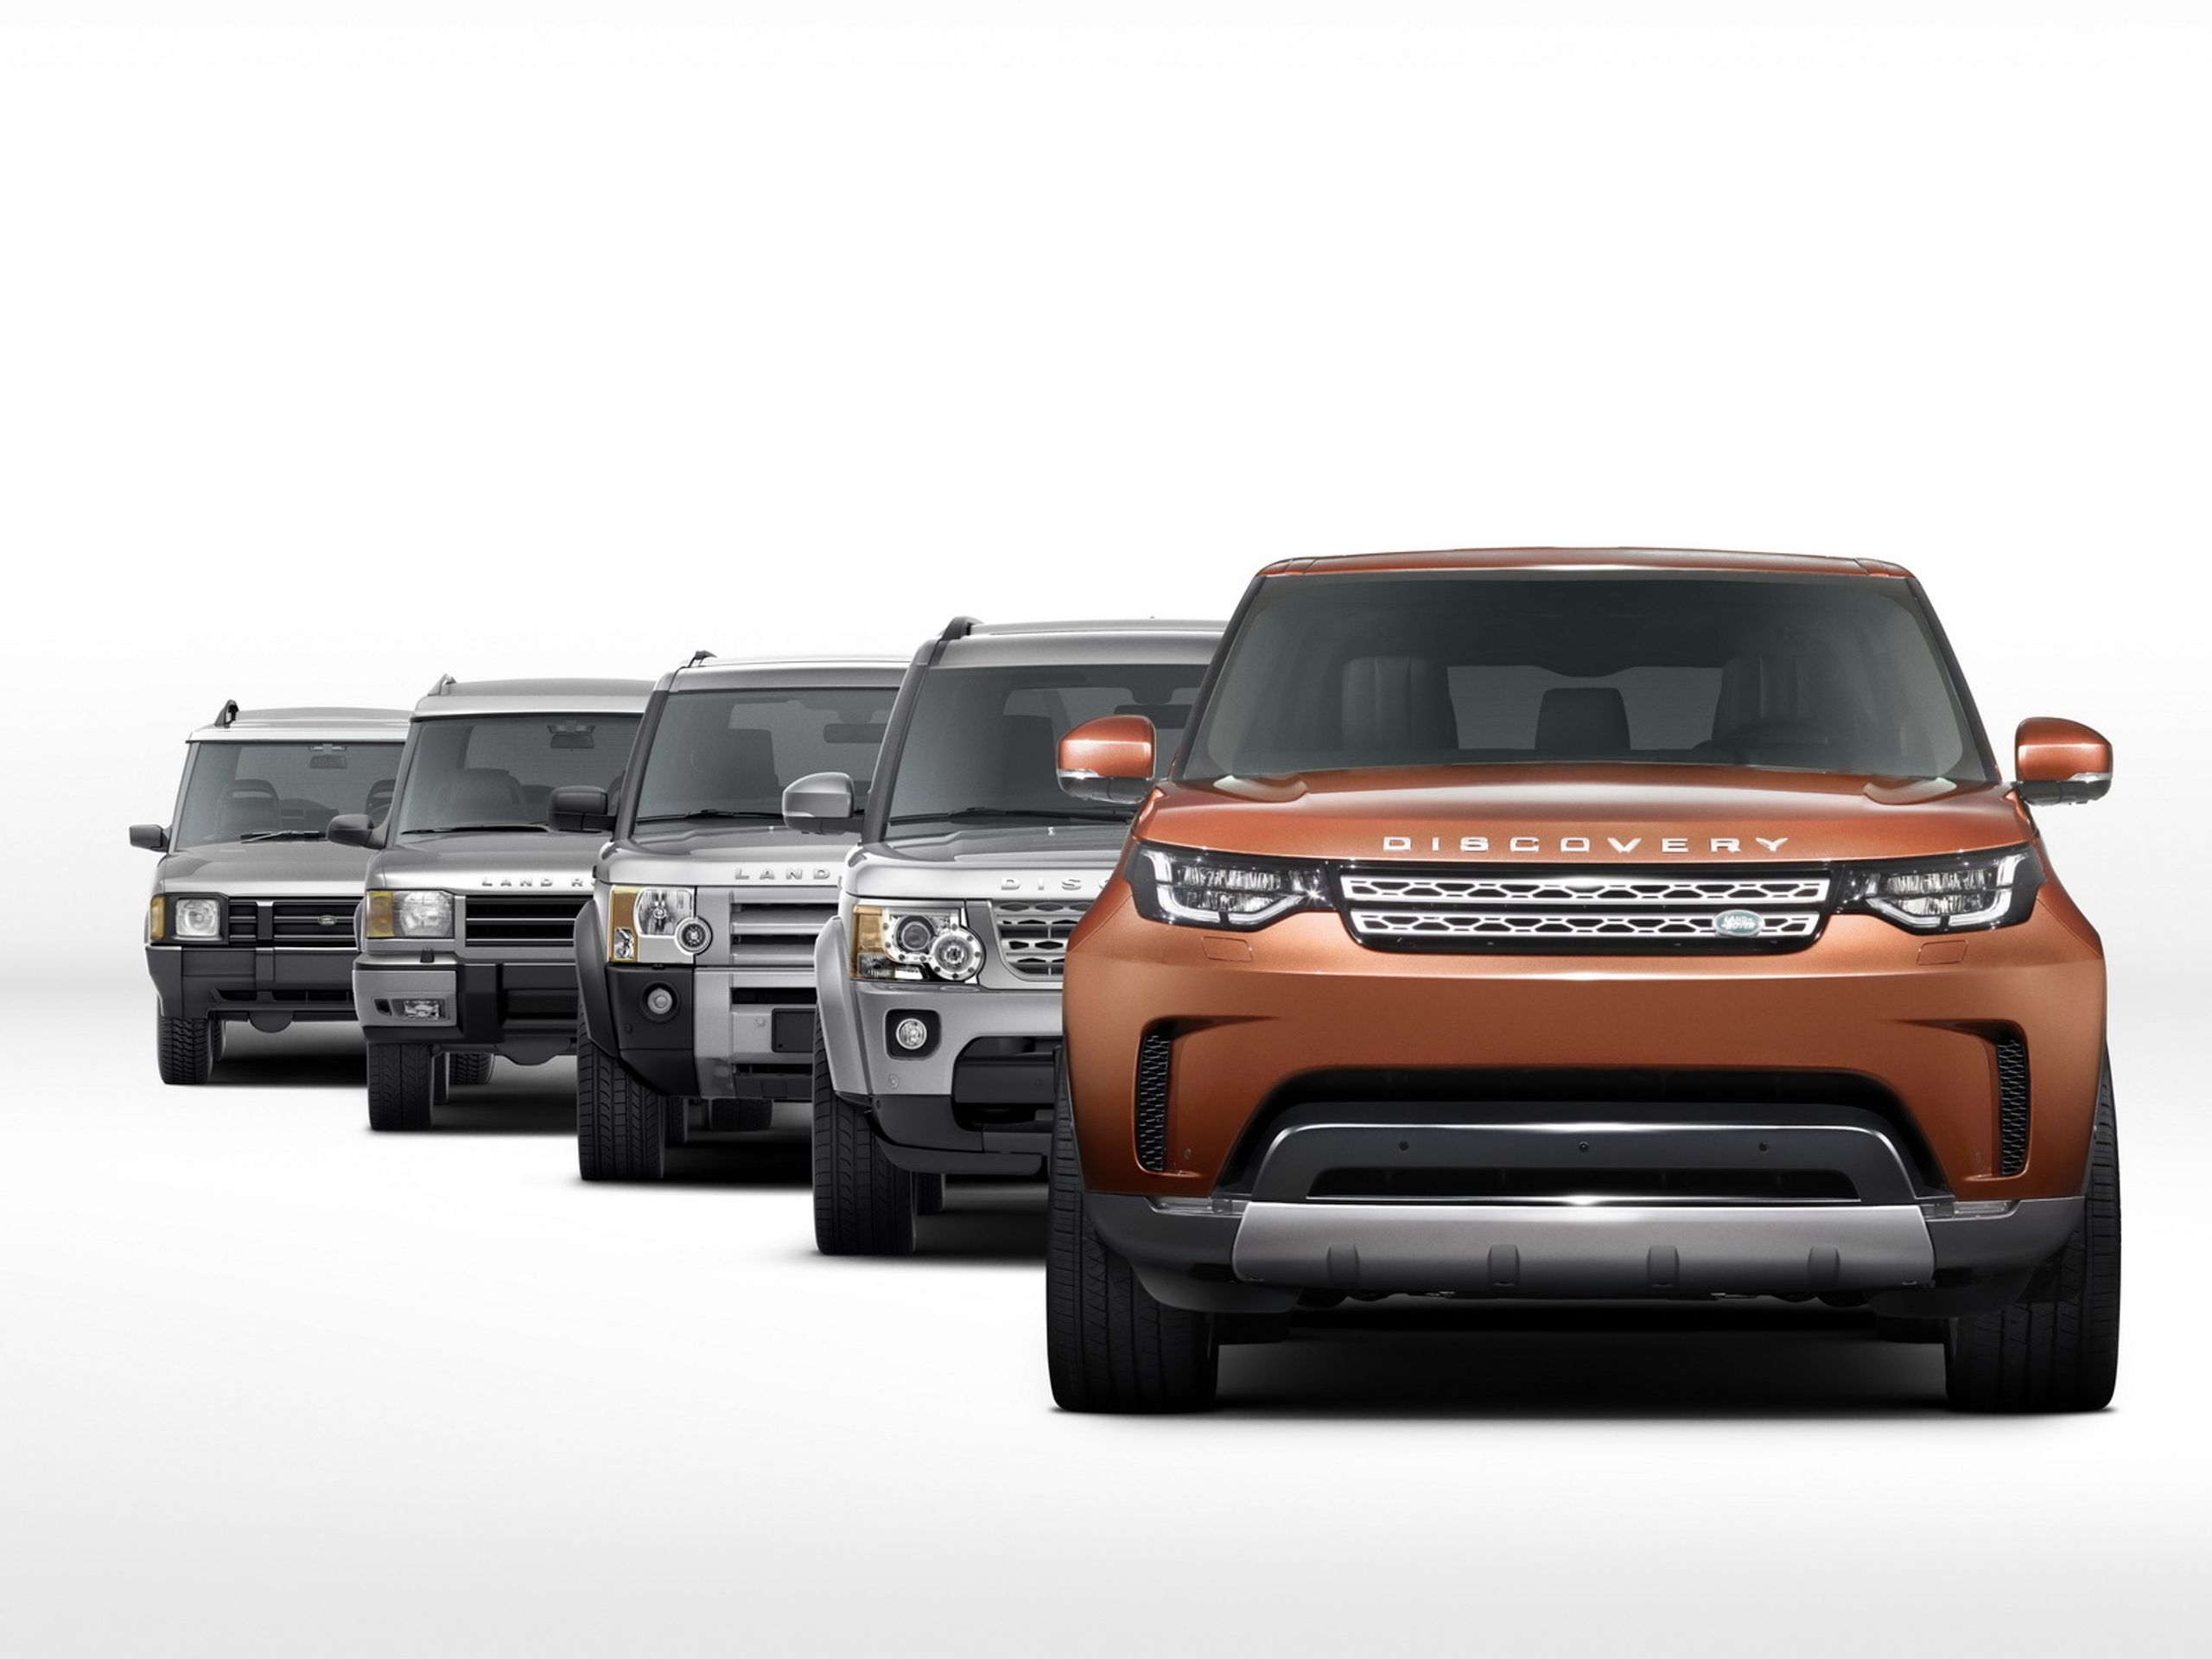 Discovery - 14 - GALERIE: Land Rover Discovery (1/7)